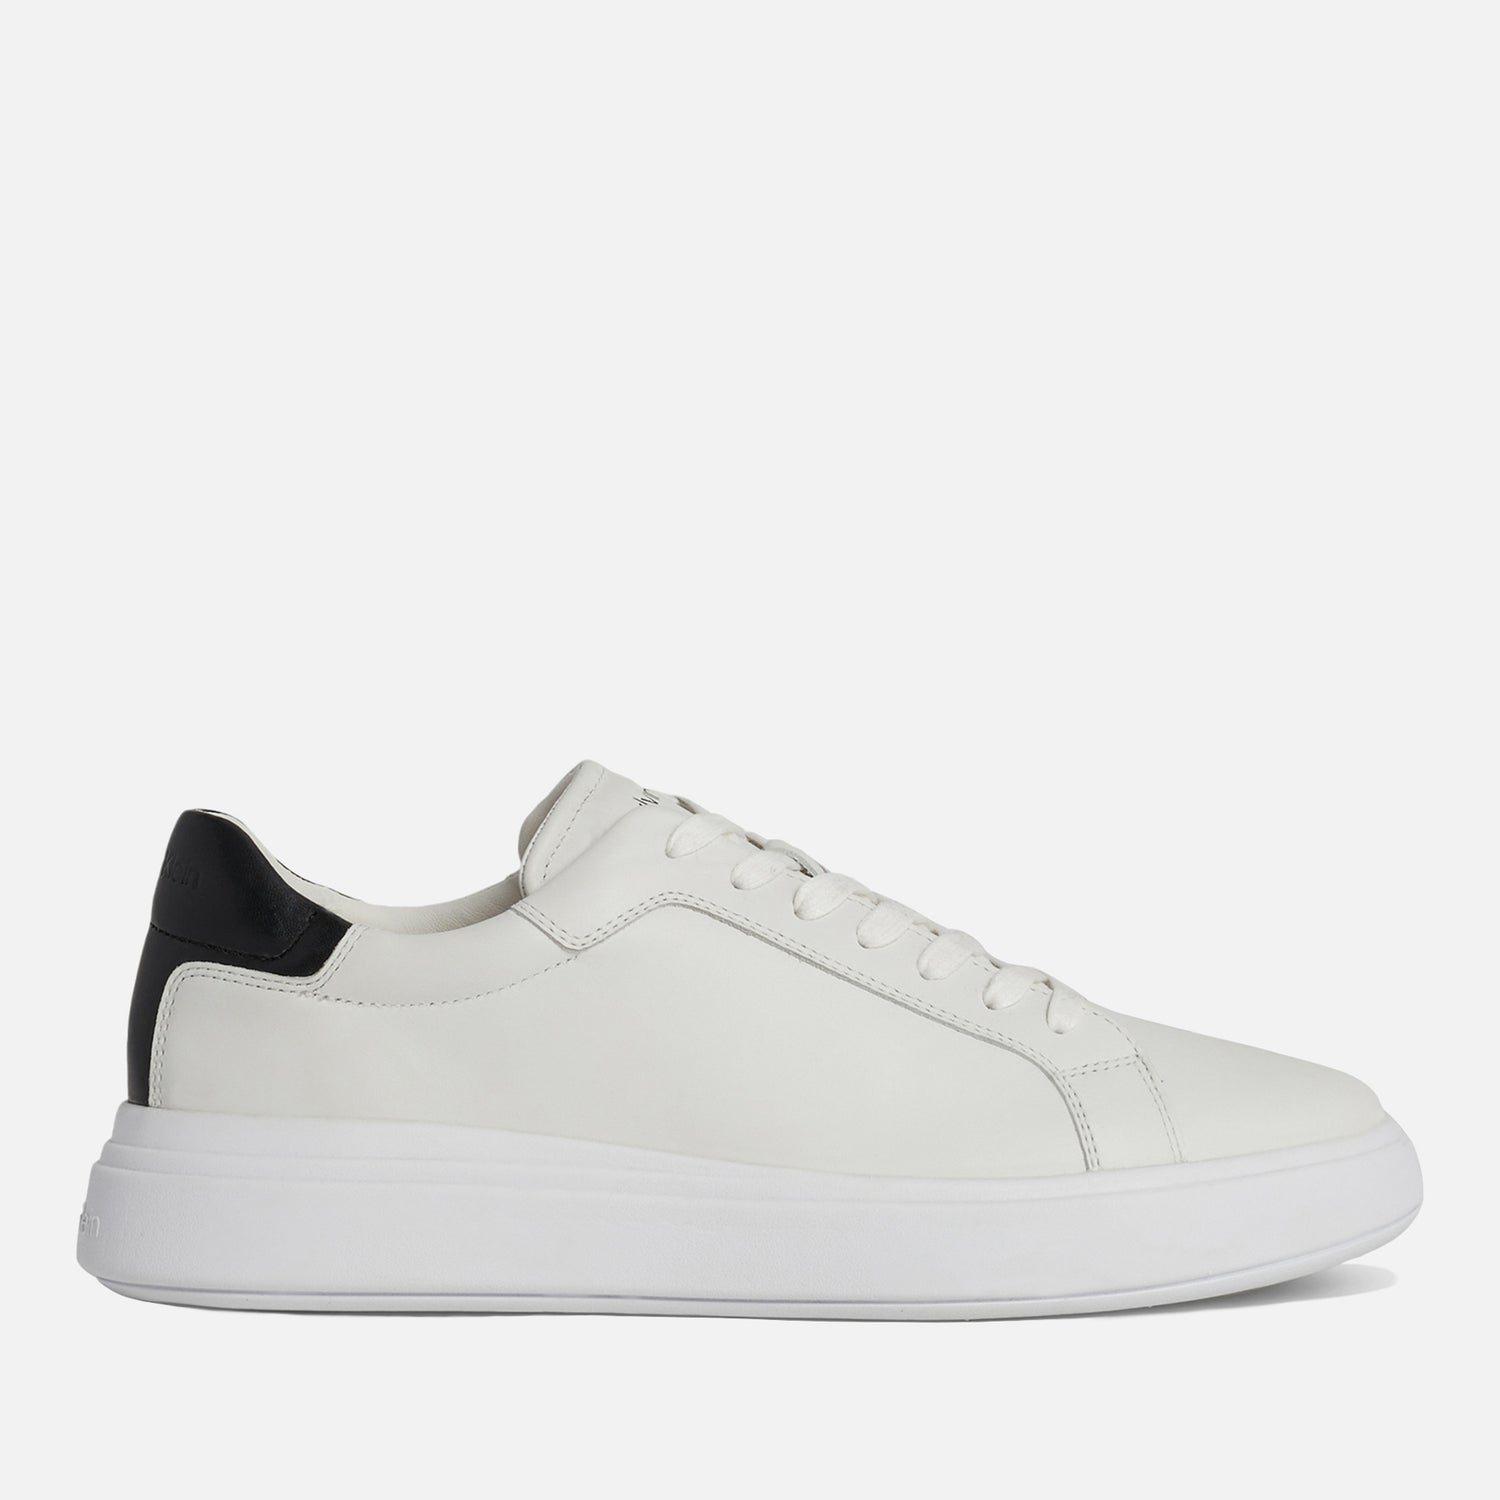 Calvin Klein Men's Leather Chunky Sole Trainers - UK 9